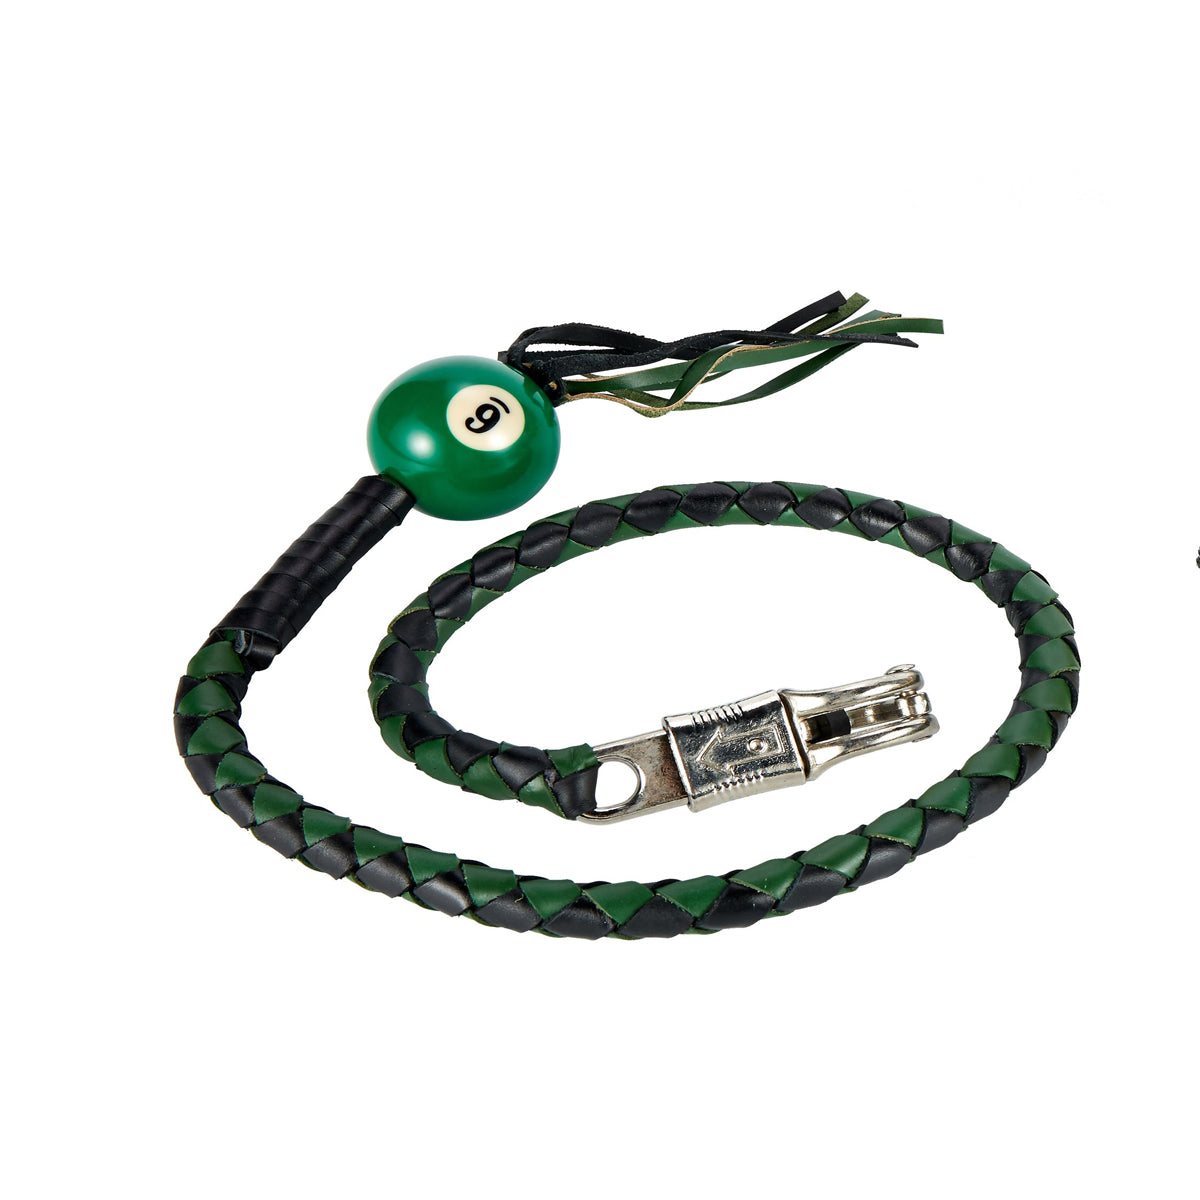 Black And Green Fringed Get Back Whip W/ Pool Ball